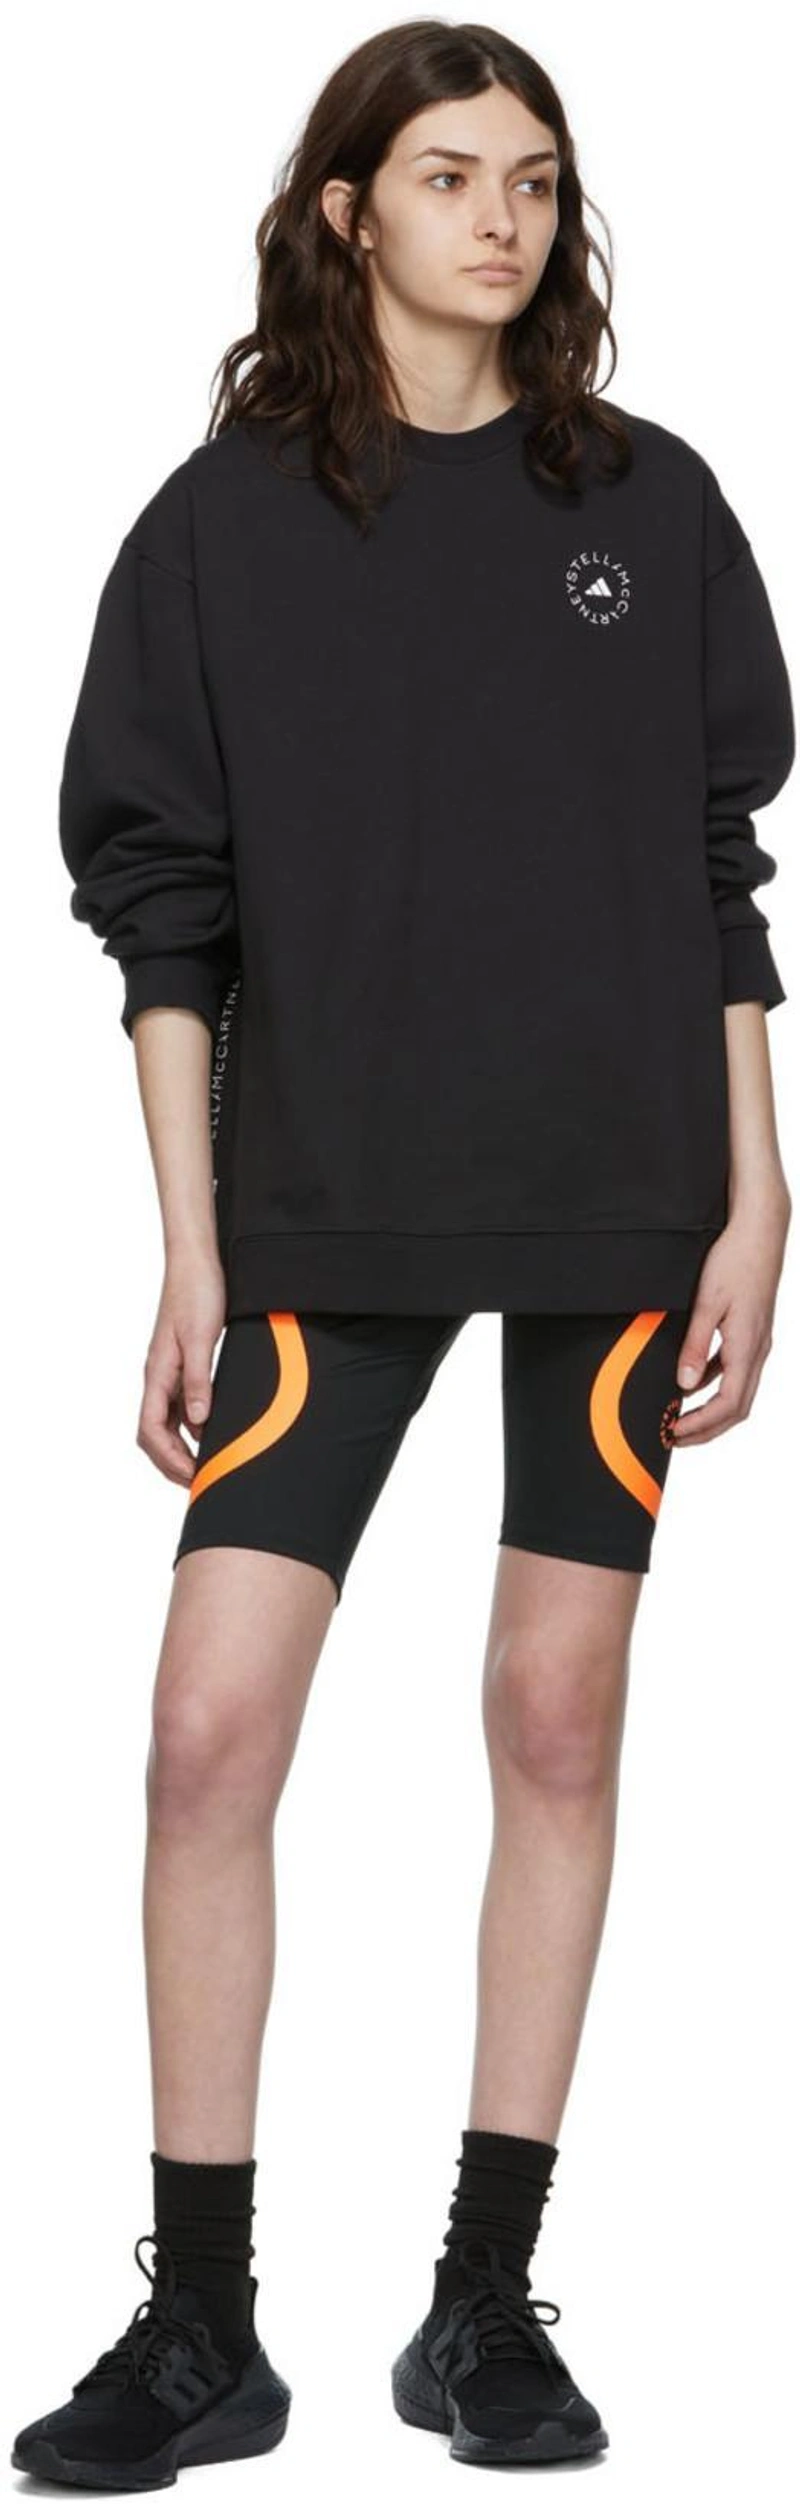 SSENSE's Post | Wearing: Adidas Originals Ultraboost 21 Primeblue Trainers In Black; Adidas By Stella Mccartney Black Recycled Polyester Sport Shorts; Adidas By Stella Mccartney Logo Print Training Sweatshirt In Black